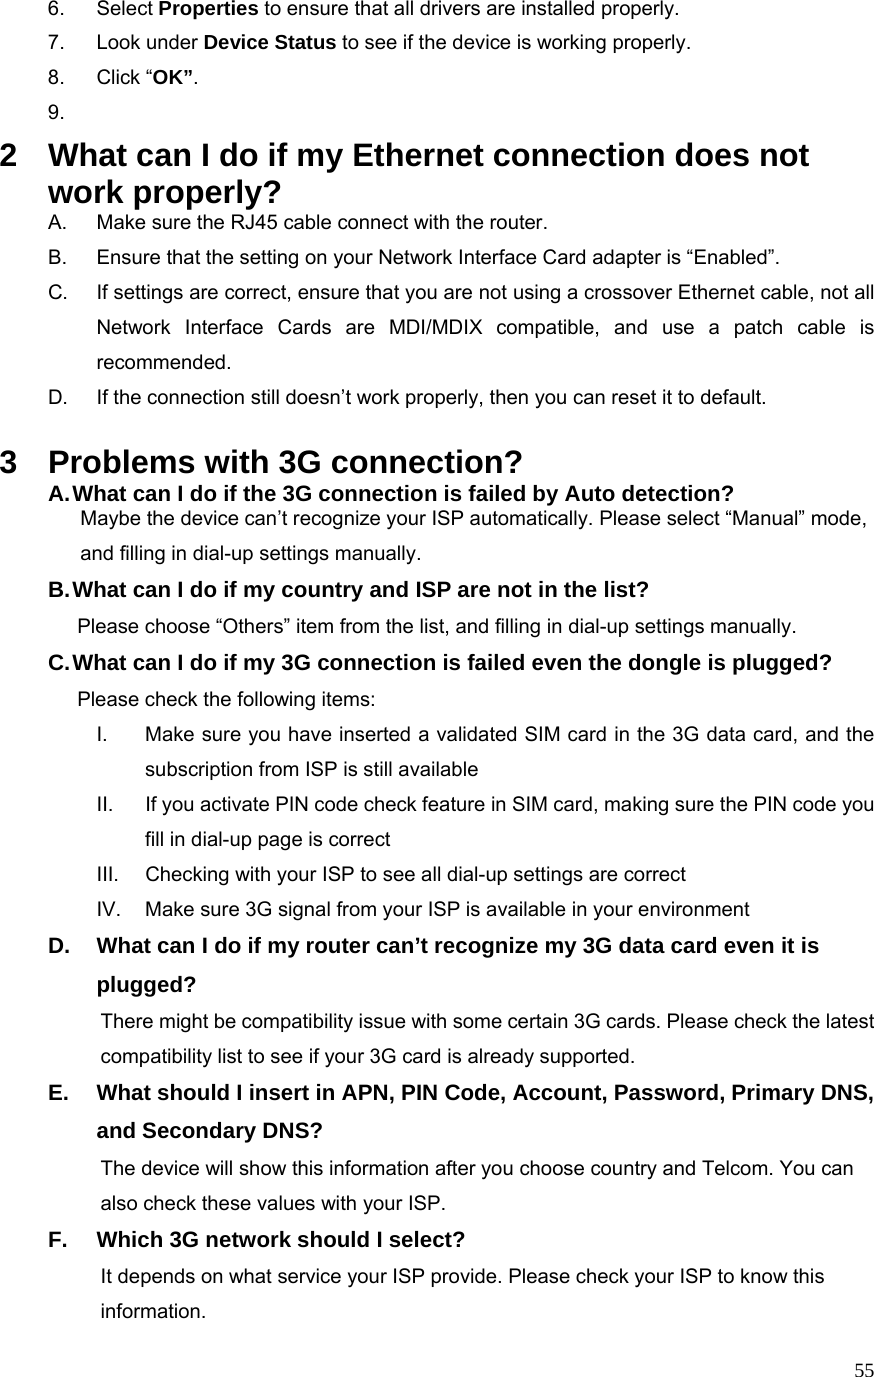  556. Select Properties to ensure that all drivers are installed properly. 7. Look under Device Status to see if the device is working properly. 8. Click “OK”. 9.  2  What can I do if my Ethernet connection does not work properly? A.  Make sure the RJ45 cable connect with the router. B.  Ensure that the setting on your Network Interface Card adapter is “Enabled”. C.  If settings are correct, ensure that you are not using a crossover Ethernet cable, not all Network Interface Cards are MDI/MDIX compatible, and use a patch cable is recommended. D.  If the connection still doesn’t work properly, then you can reset it to default.      3  Problems with 3G connection? A. What can I do if the 3G connection is failed by Auto detection?           Maybe the device can’t recognize your ISP automatically. Please select “Manual” mode,                       and filling in dial-up settings manually. B. What can I do if my country and ISP are not in the list?        Please choose “Others” item from the list, and filling in dial-up settings manually. C. What can I do if my 3G connection is failed even the dongle is plugged?        Please check the following items: I.  Make sure you have inserted a validated SIM card in the 3G data card, and the subscription from ISP is still available II.  If you activate PIN code check feature in SIM card, making sure the PIN code you fill in dial-up page is correct III.  Checking with your ISP to see all dial-up settings are correct IV.  Make sure 3G signal from your ISP is available in your environment D.  What can I do if my router can’t recognize my 3G data card even it is plugged?           There might be compatibility issue with some certain 3G cards. Please check the latest                           compatibility list to see if your 3G card is already supported. E.  What should I insert in APN, PIN Code, Account, Password, Primary DNS, and Secondary DNS?                     The device will show this information after you choose country and Telcom. You can                   also check these values with your ISP. F.  Which 3G network should I select?           It depends on what service your ISP provide. Please check your ISP to know this            information. 